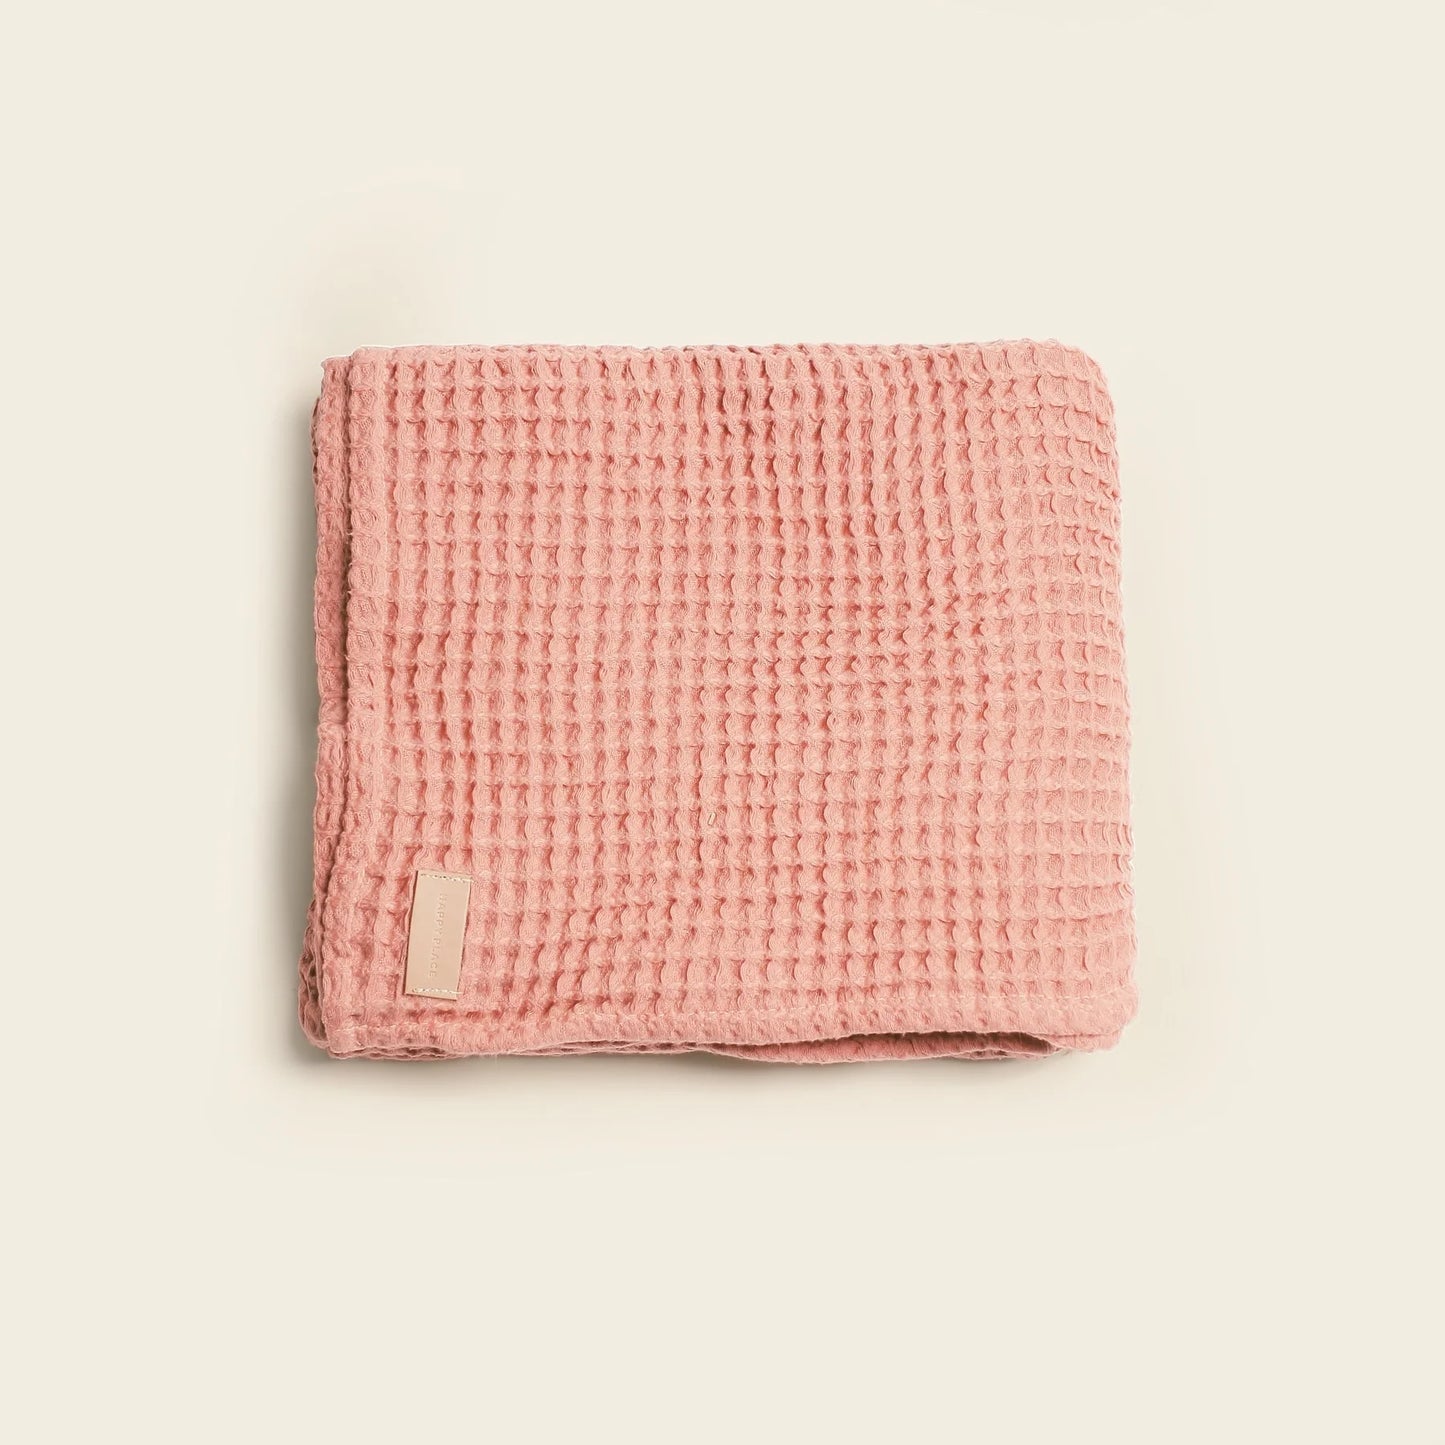 The Weightless Waffle Throw Blanket